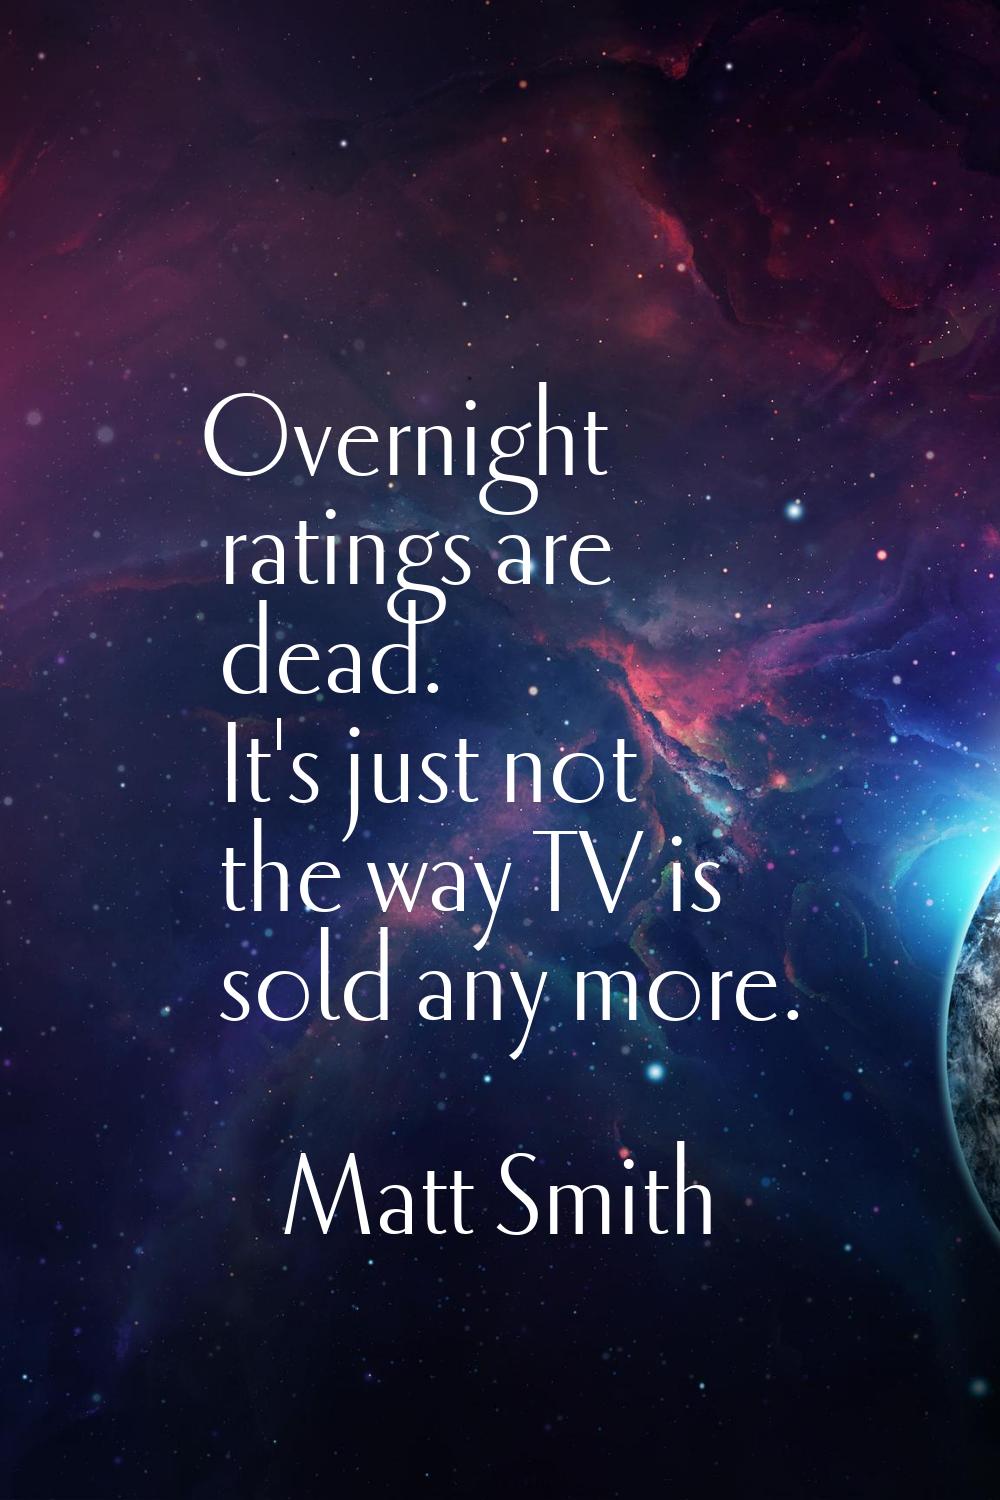 Overnight ratings are dead. It's just not the way TV is sold any more.